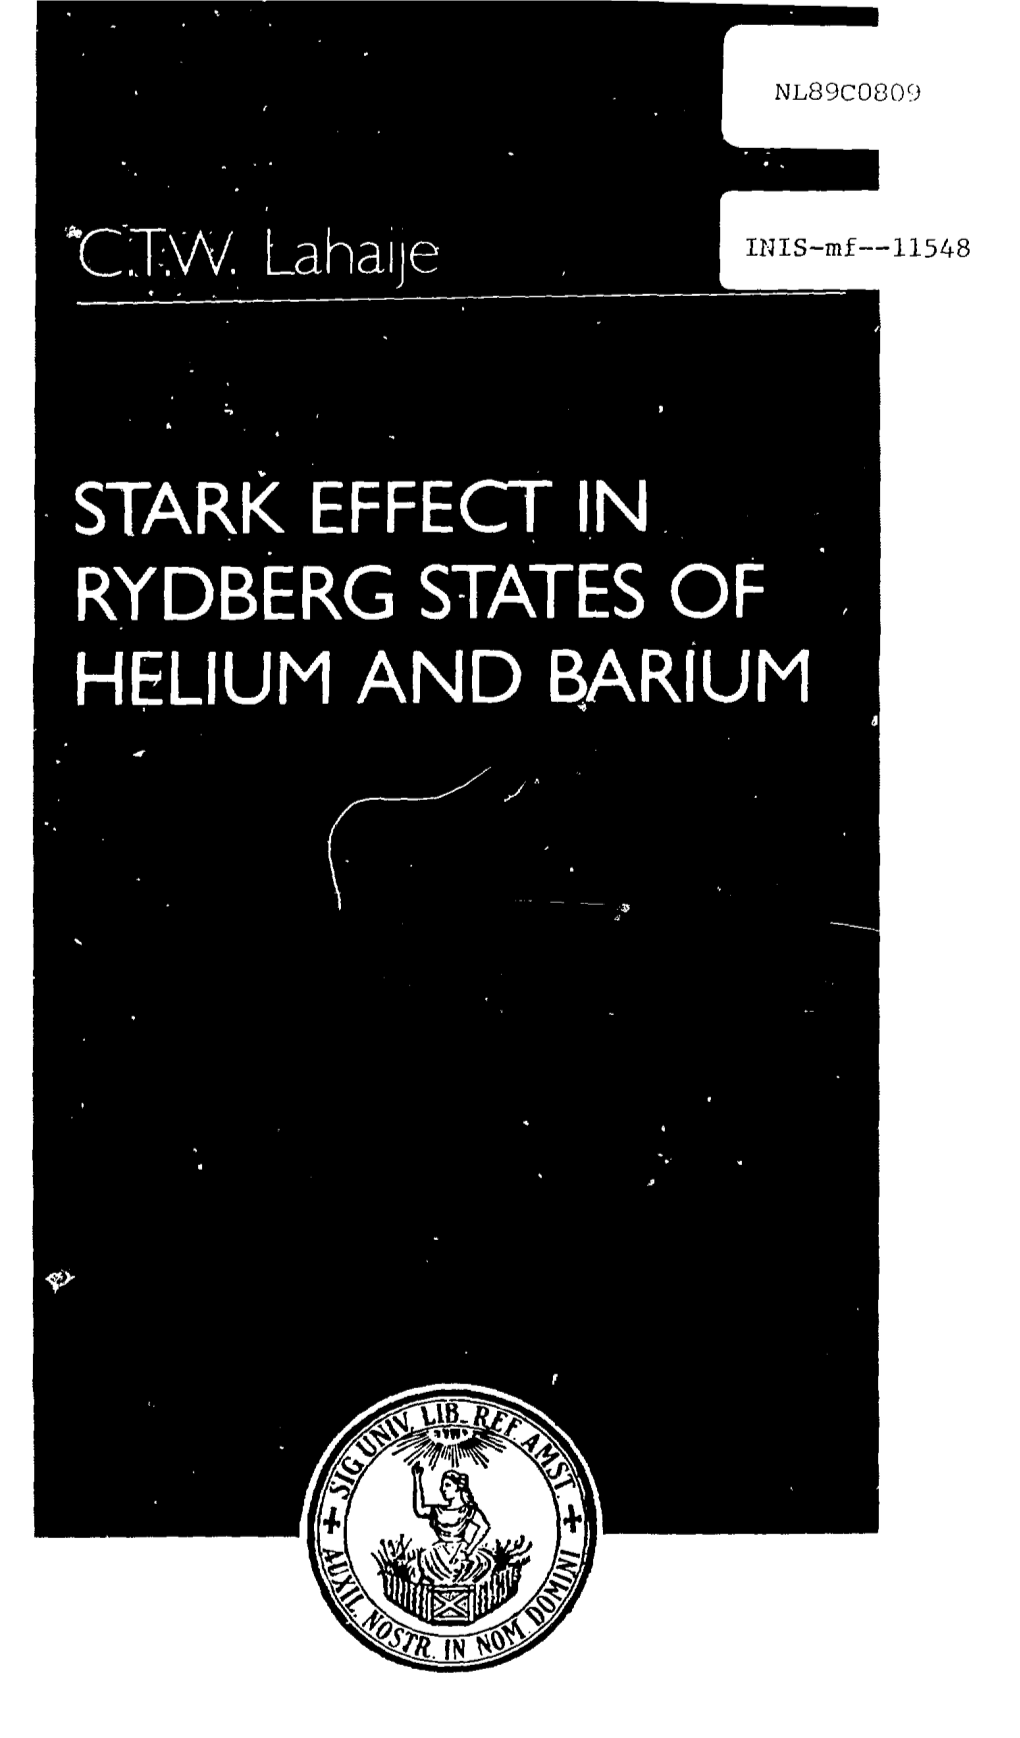 Stark Effect in Rydberg States of Helium and Barium